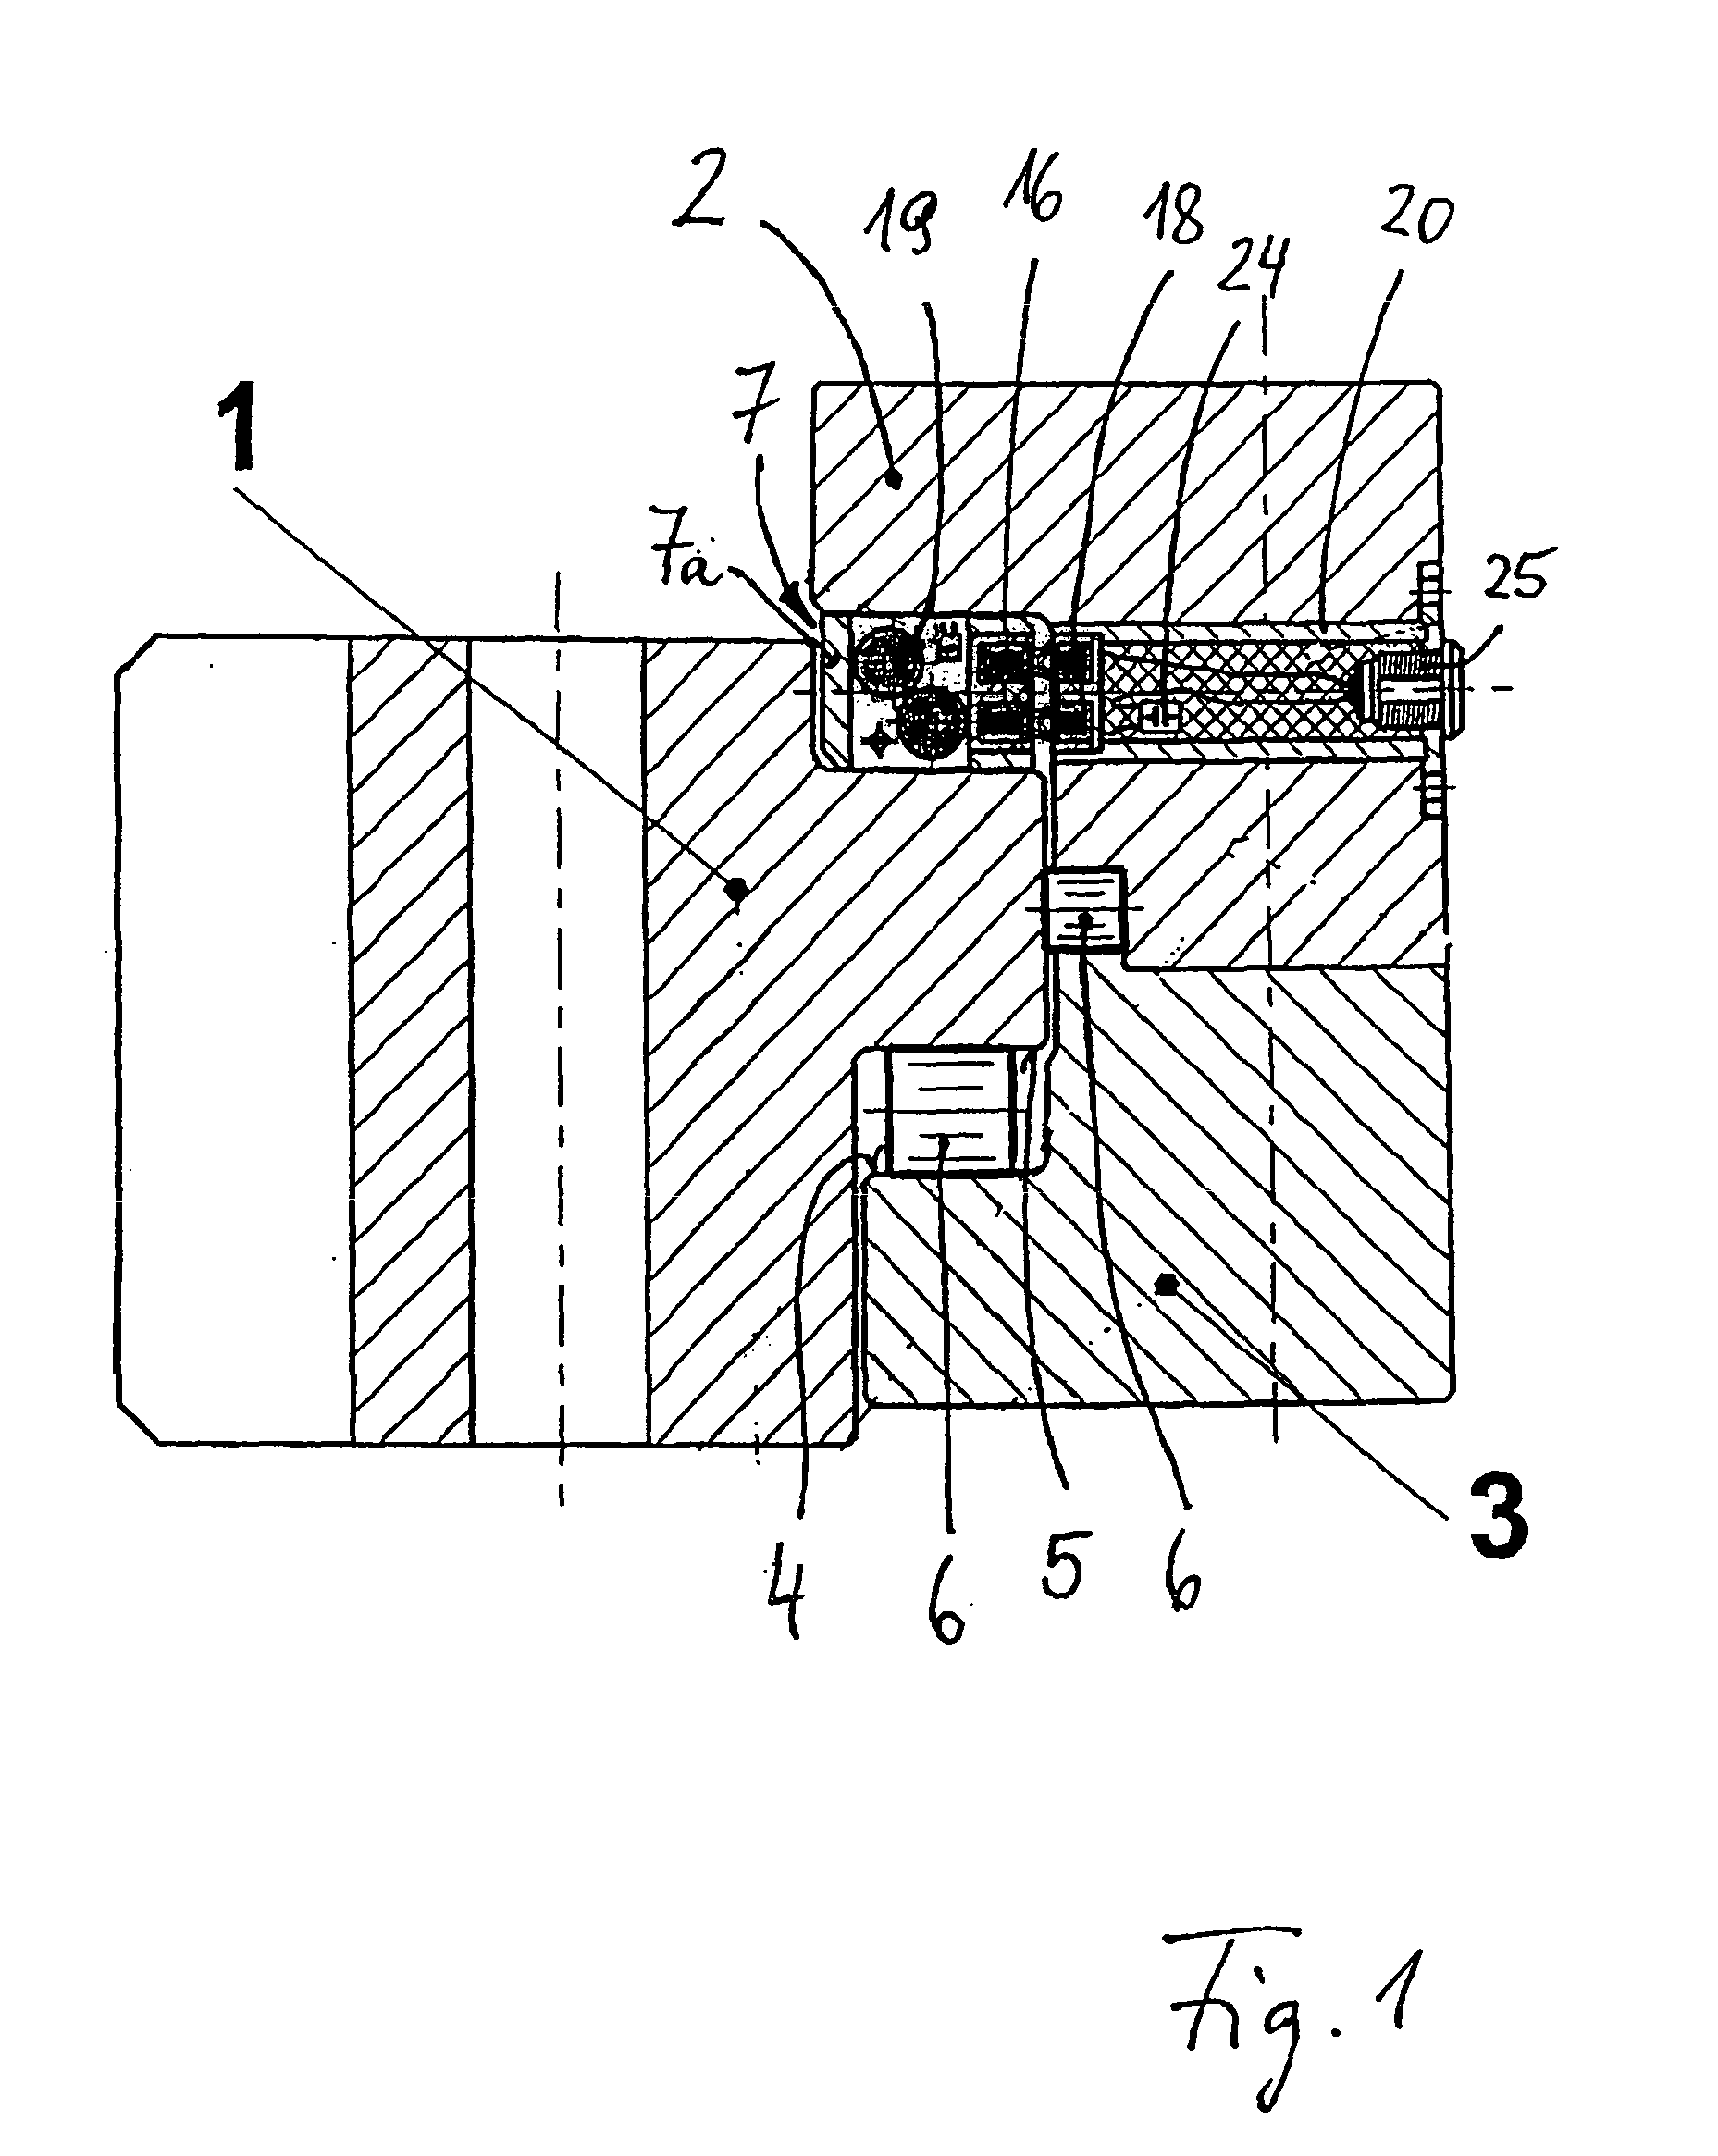 Device for detecting and monitoring damage to Anti-friction bearings